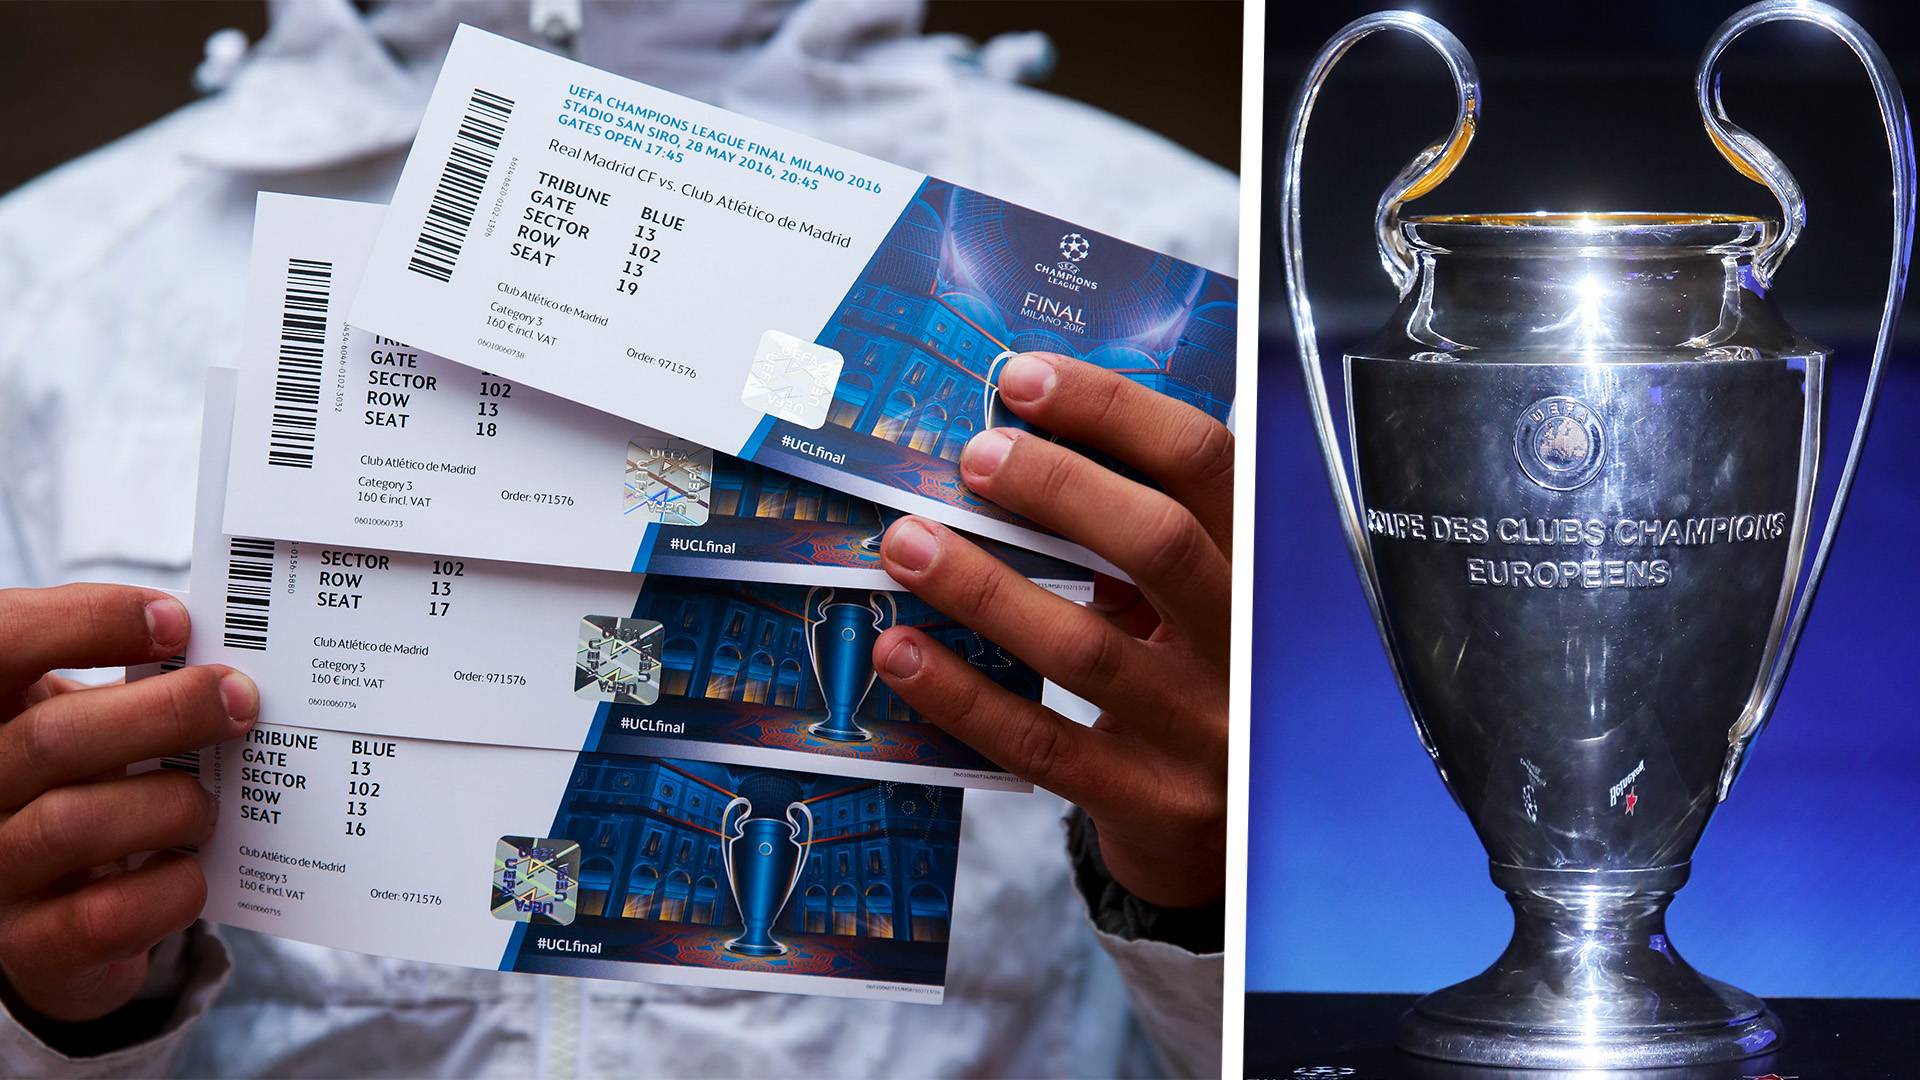 champions league ticket prices 2019